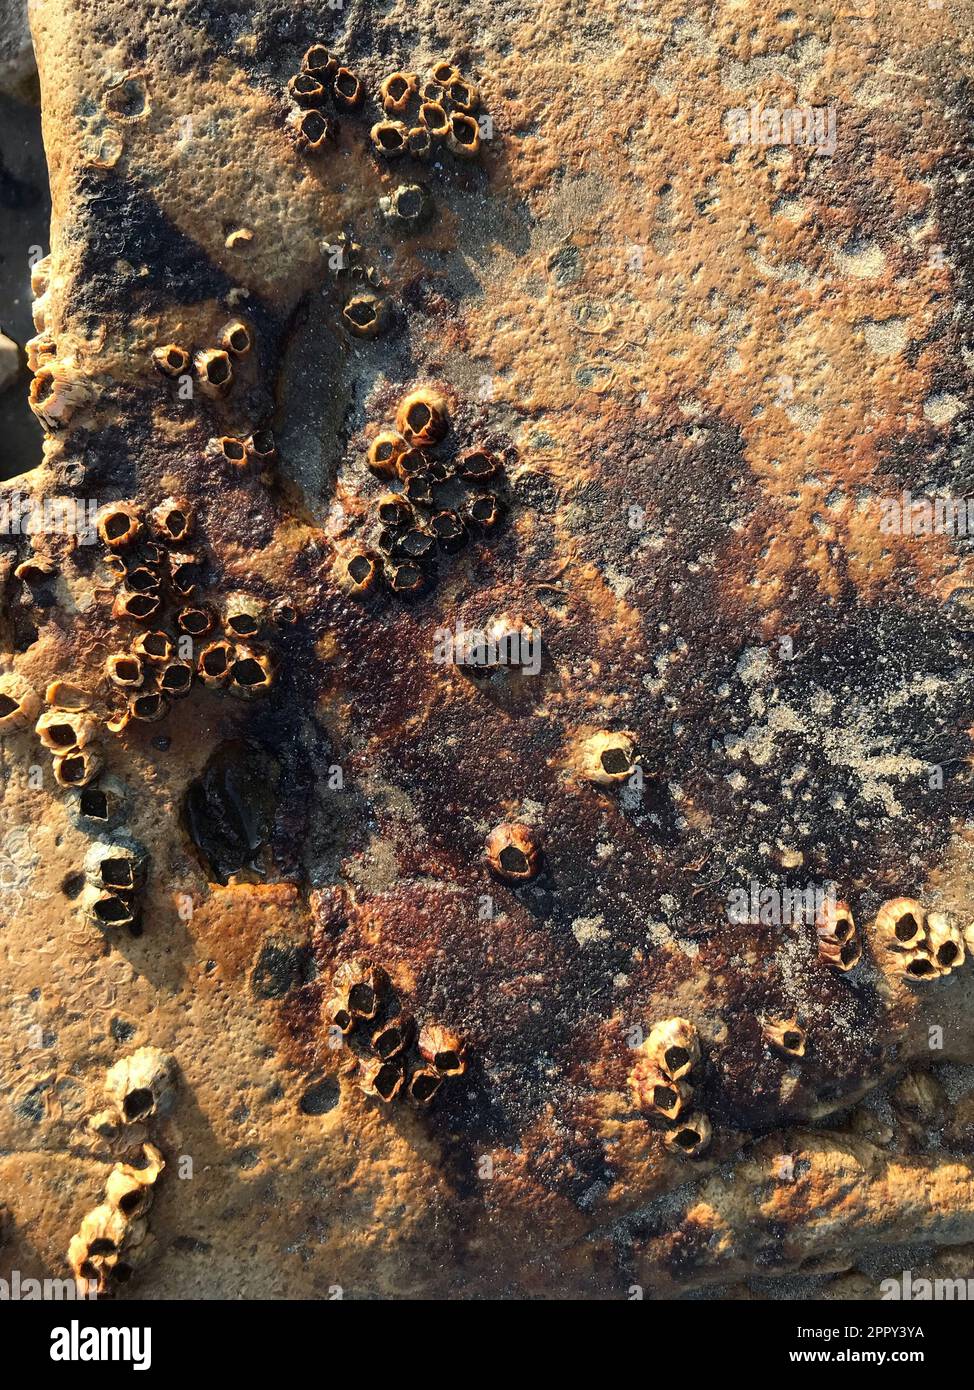 Beach scene turned into abstract art, worn barnacle shells (likely Balanus crenatus), white and orange lichen cover a rock face Possible Yellow scales Stock Photo